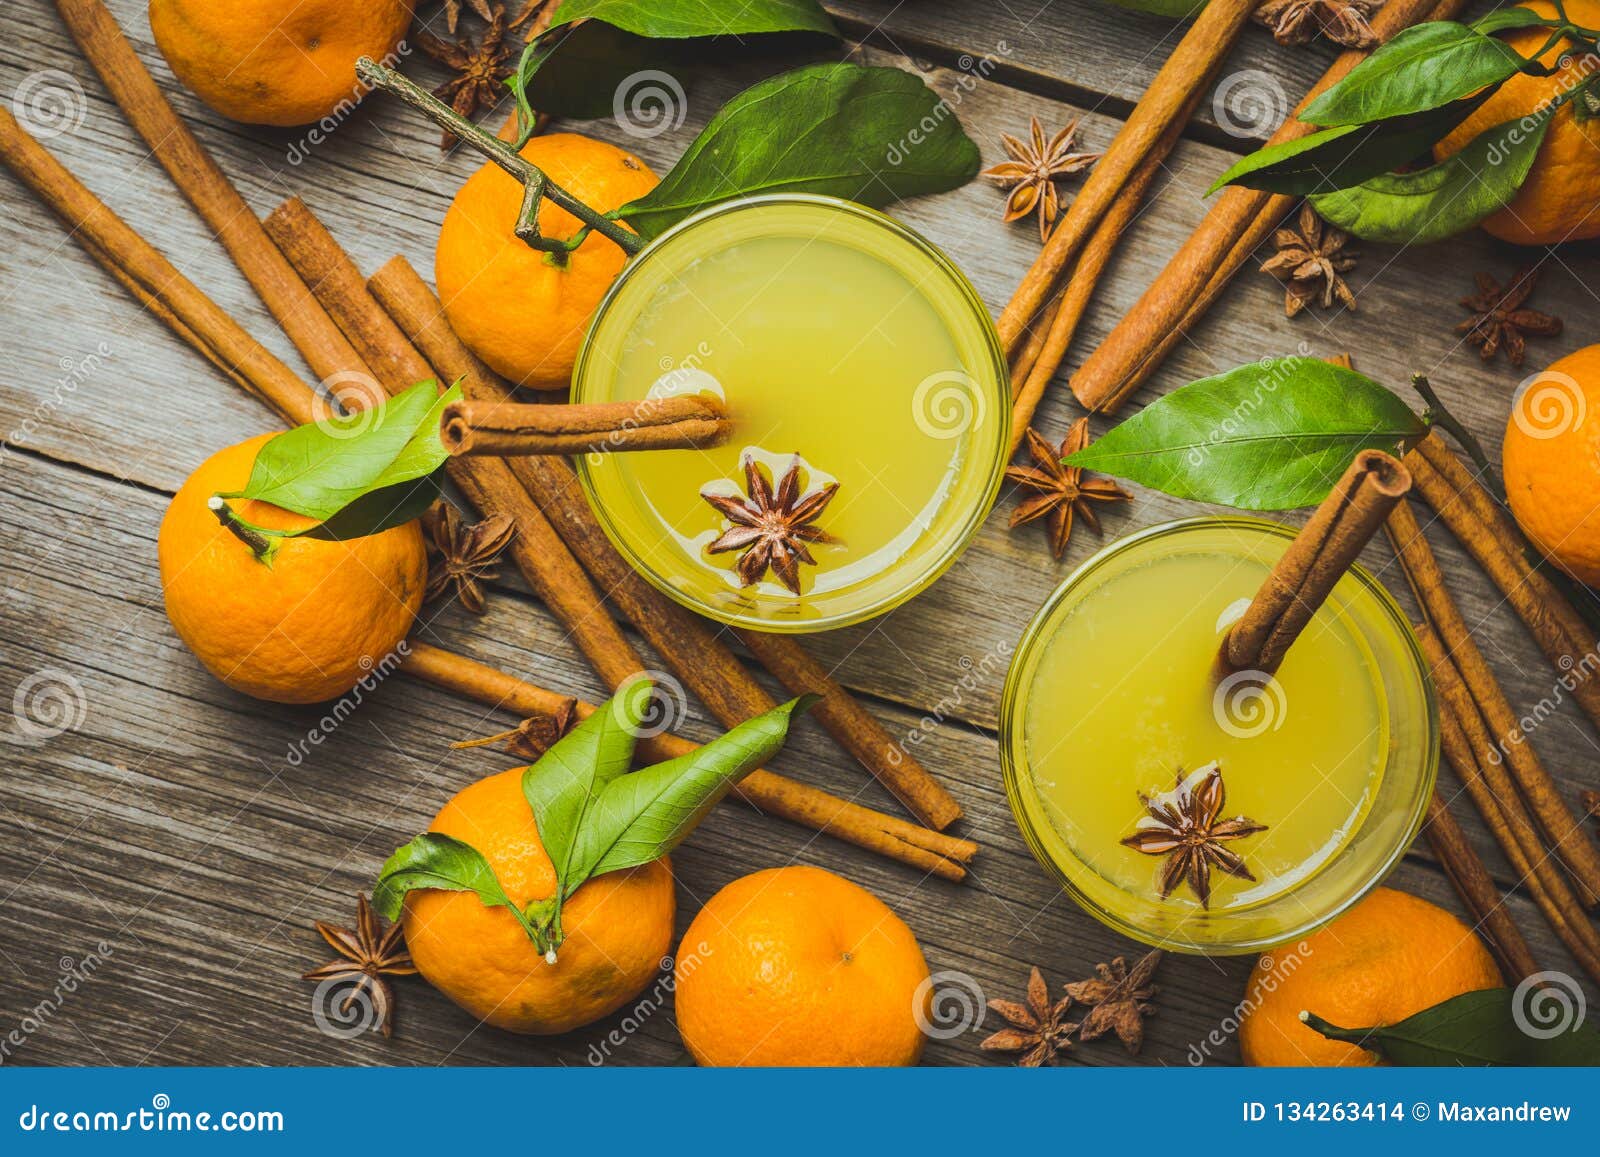 Old Fashioned Citrus Beverage with Spices Stock Photo - Image of fresh ...